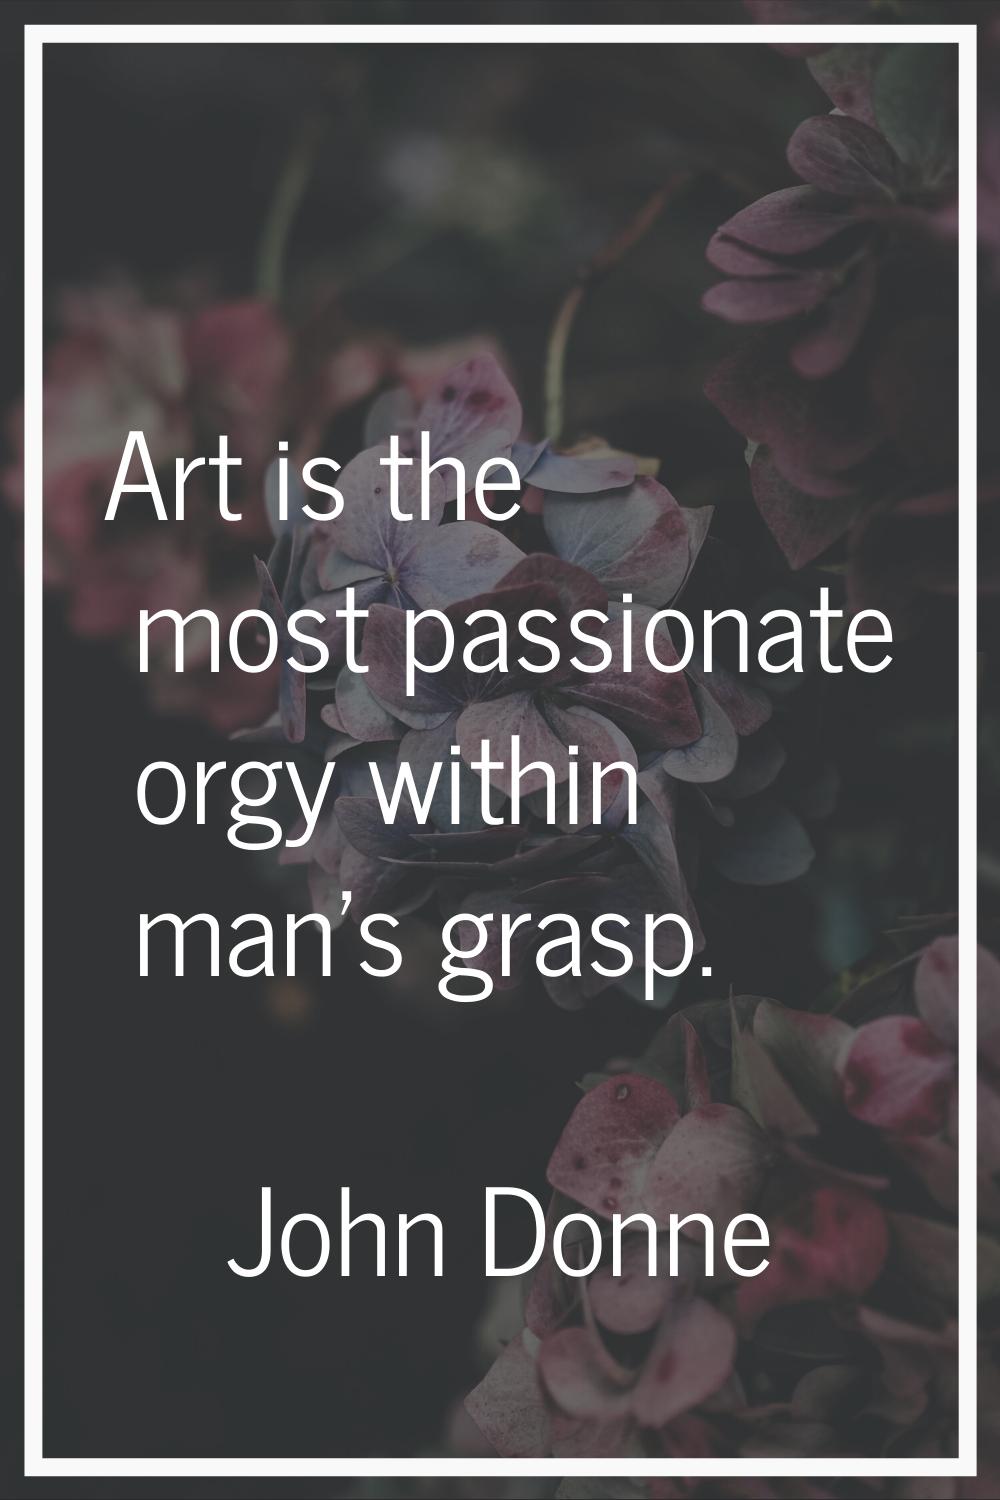 Art is the most passionate orgy within man's grasp.